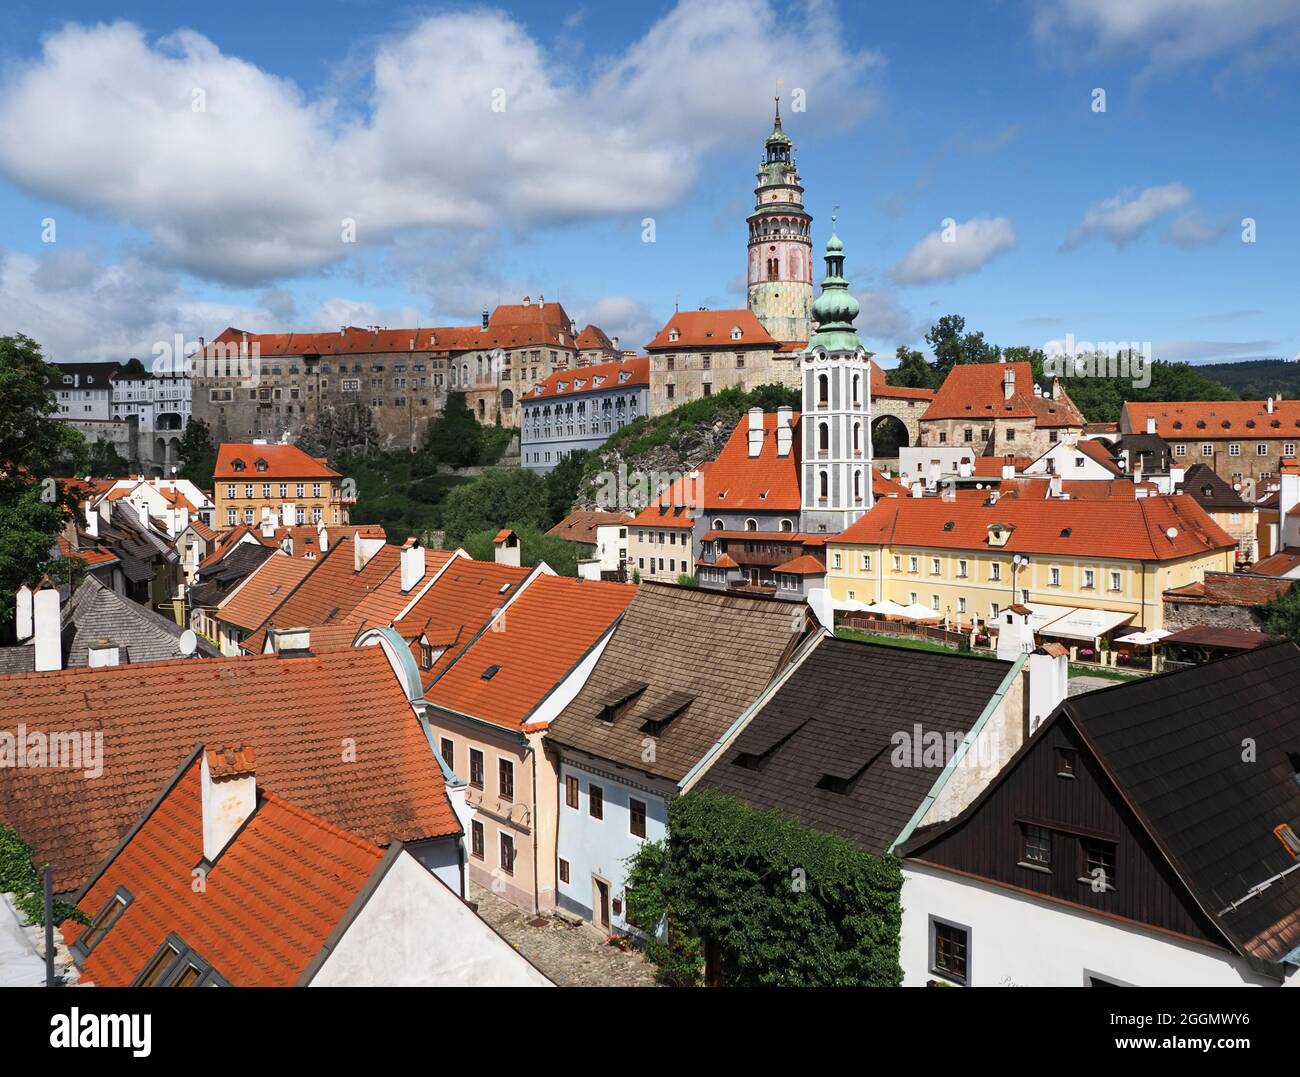 View of Èeský Krumlov (Czech Krumlov, a historic town located in southern Bohemia on theVltava river, a famous UNESCO monument, Czech Republic Stock Photo